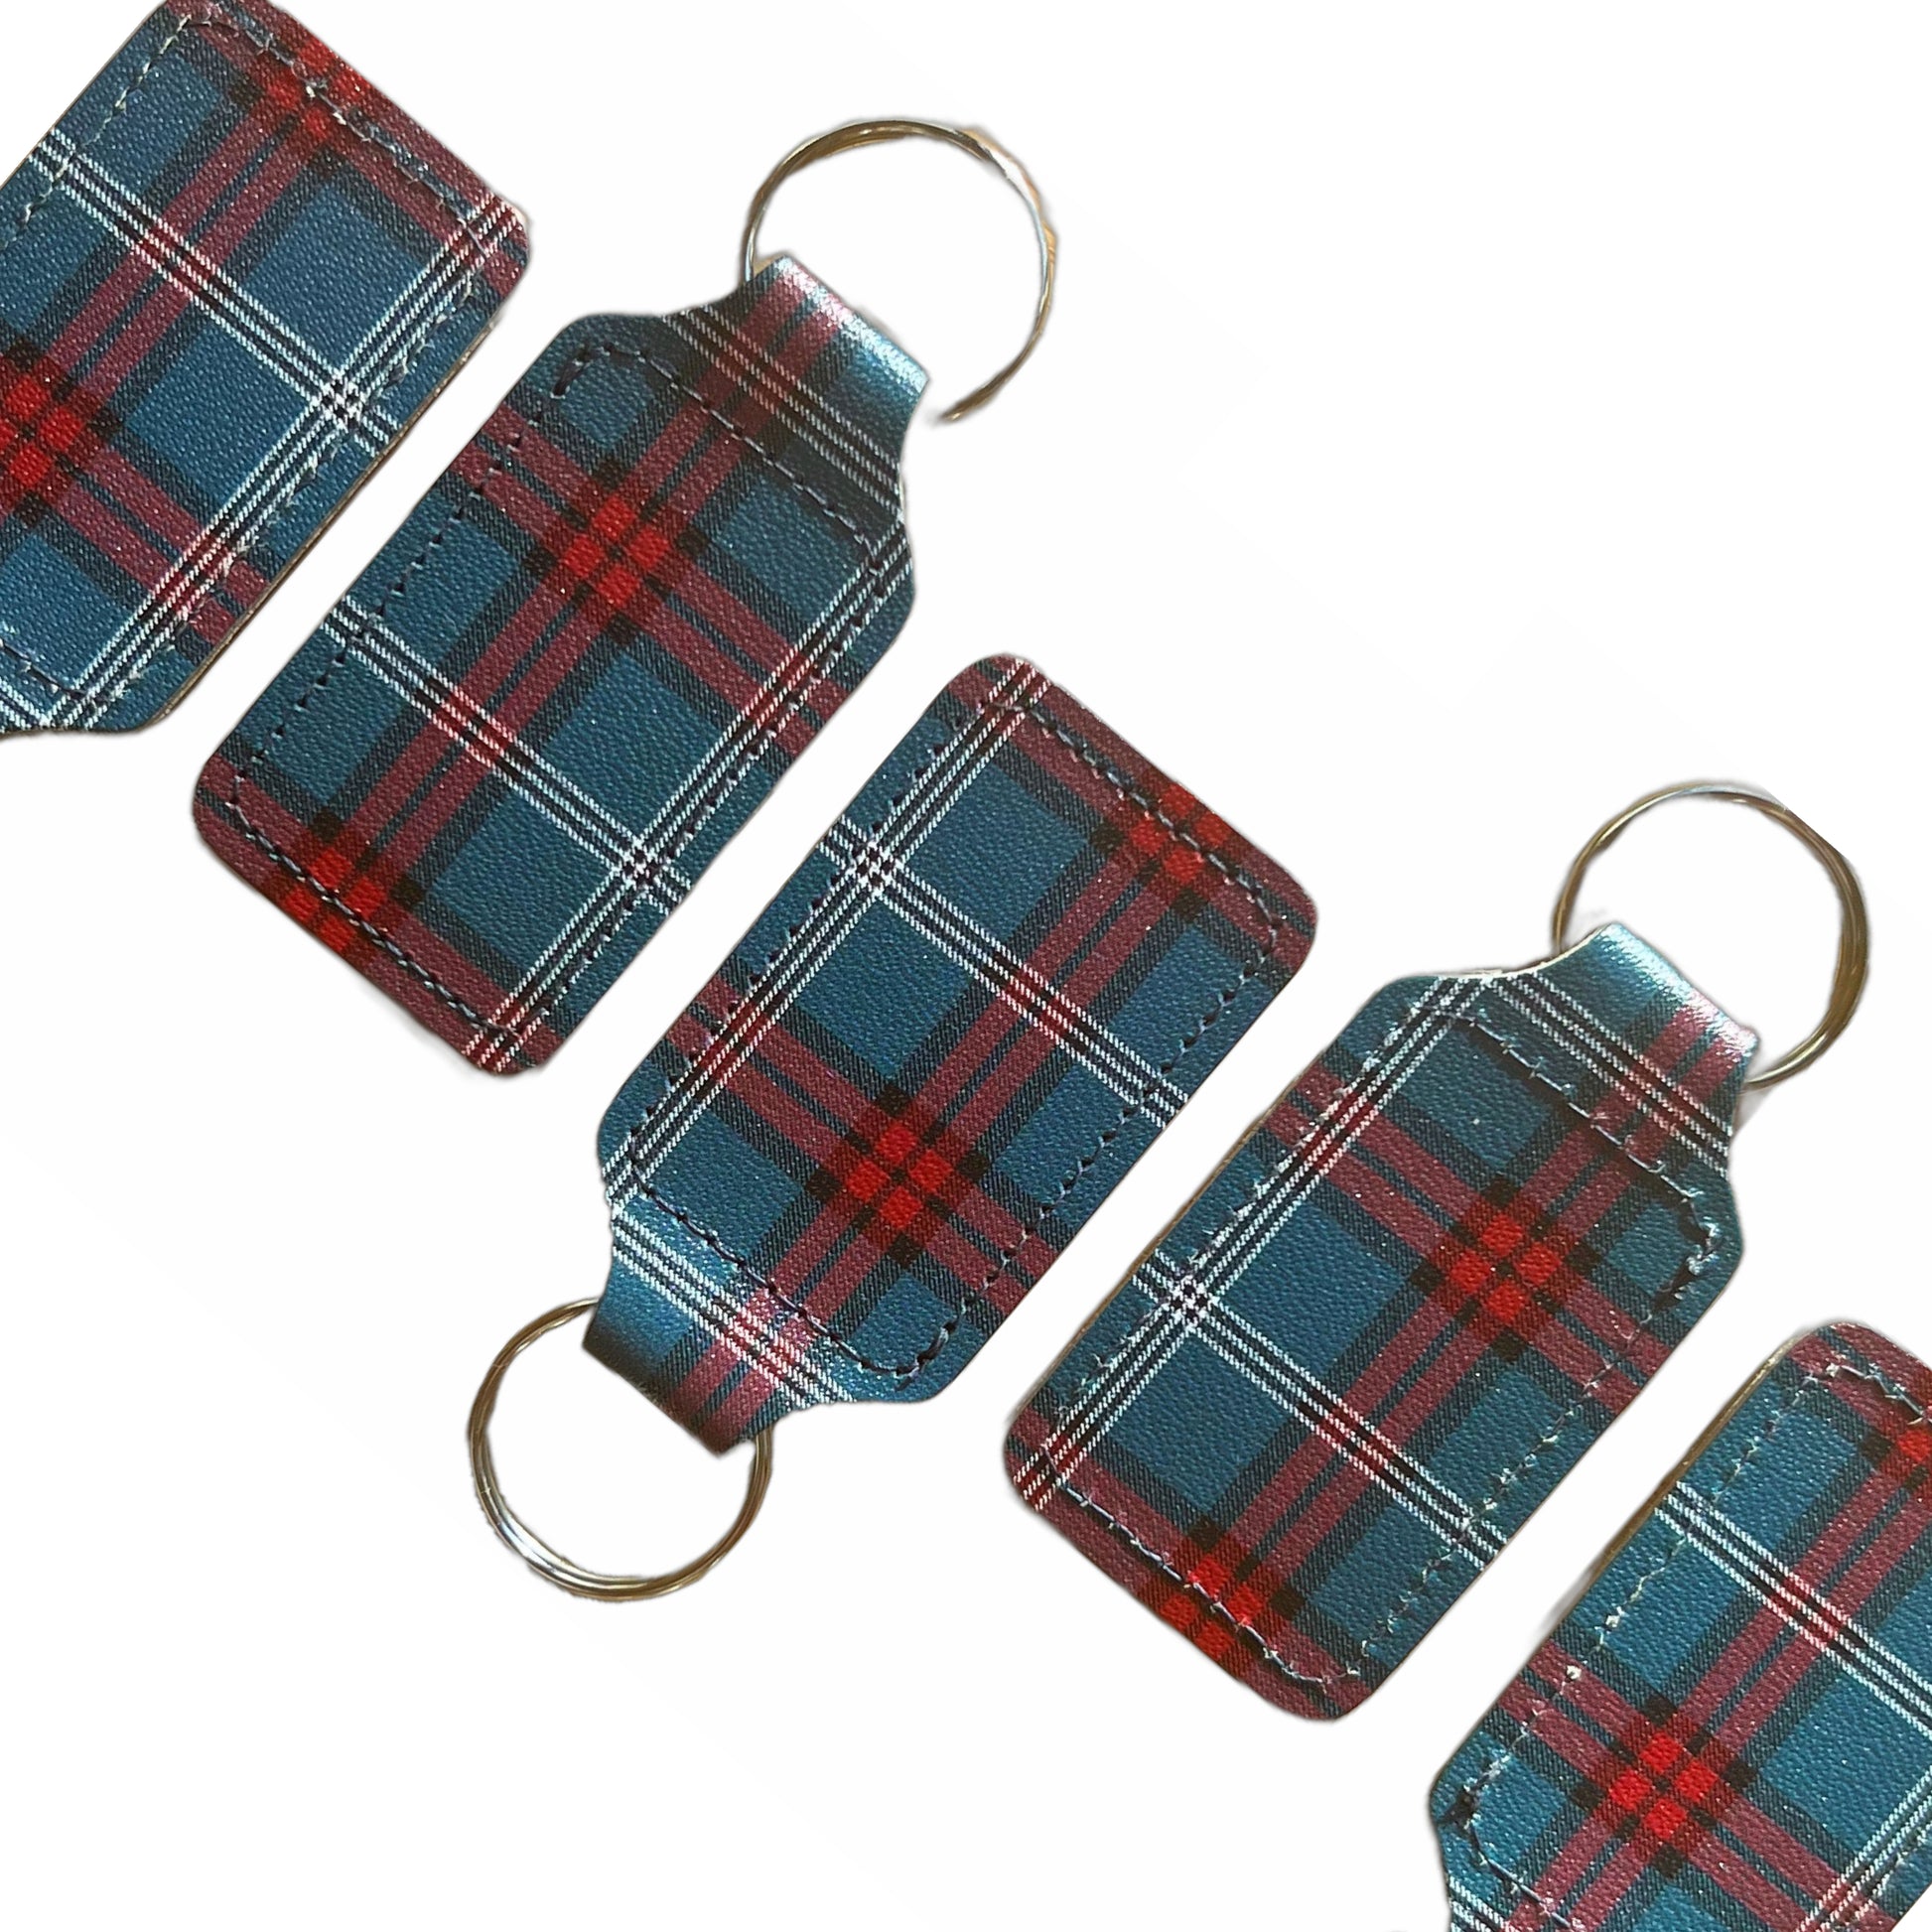 Row of key rings with a tartan design